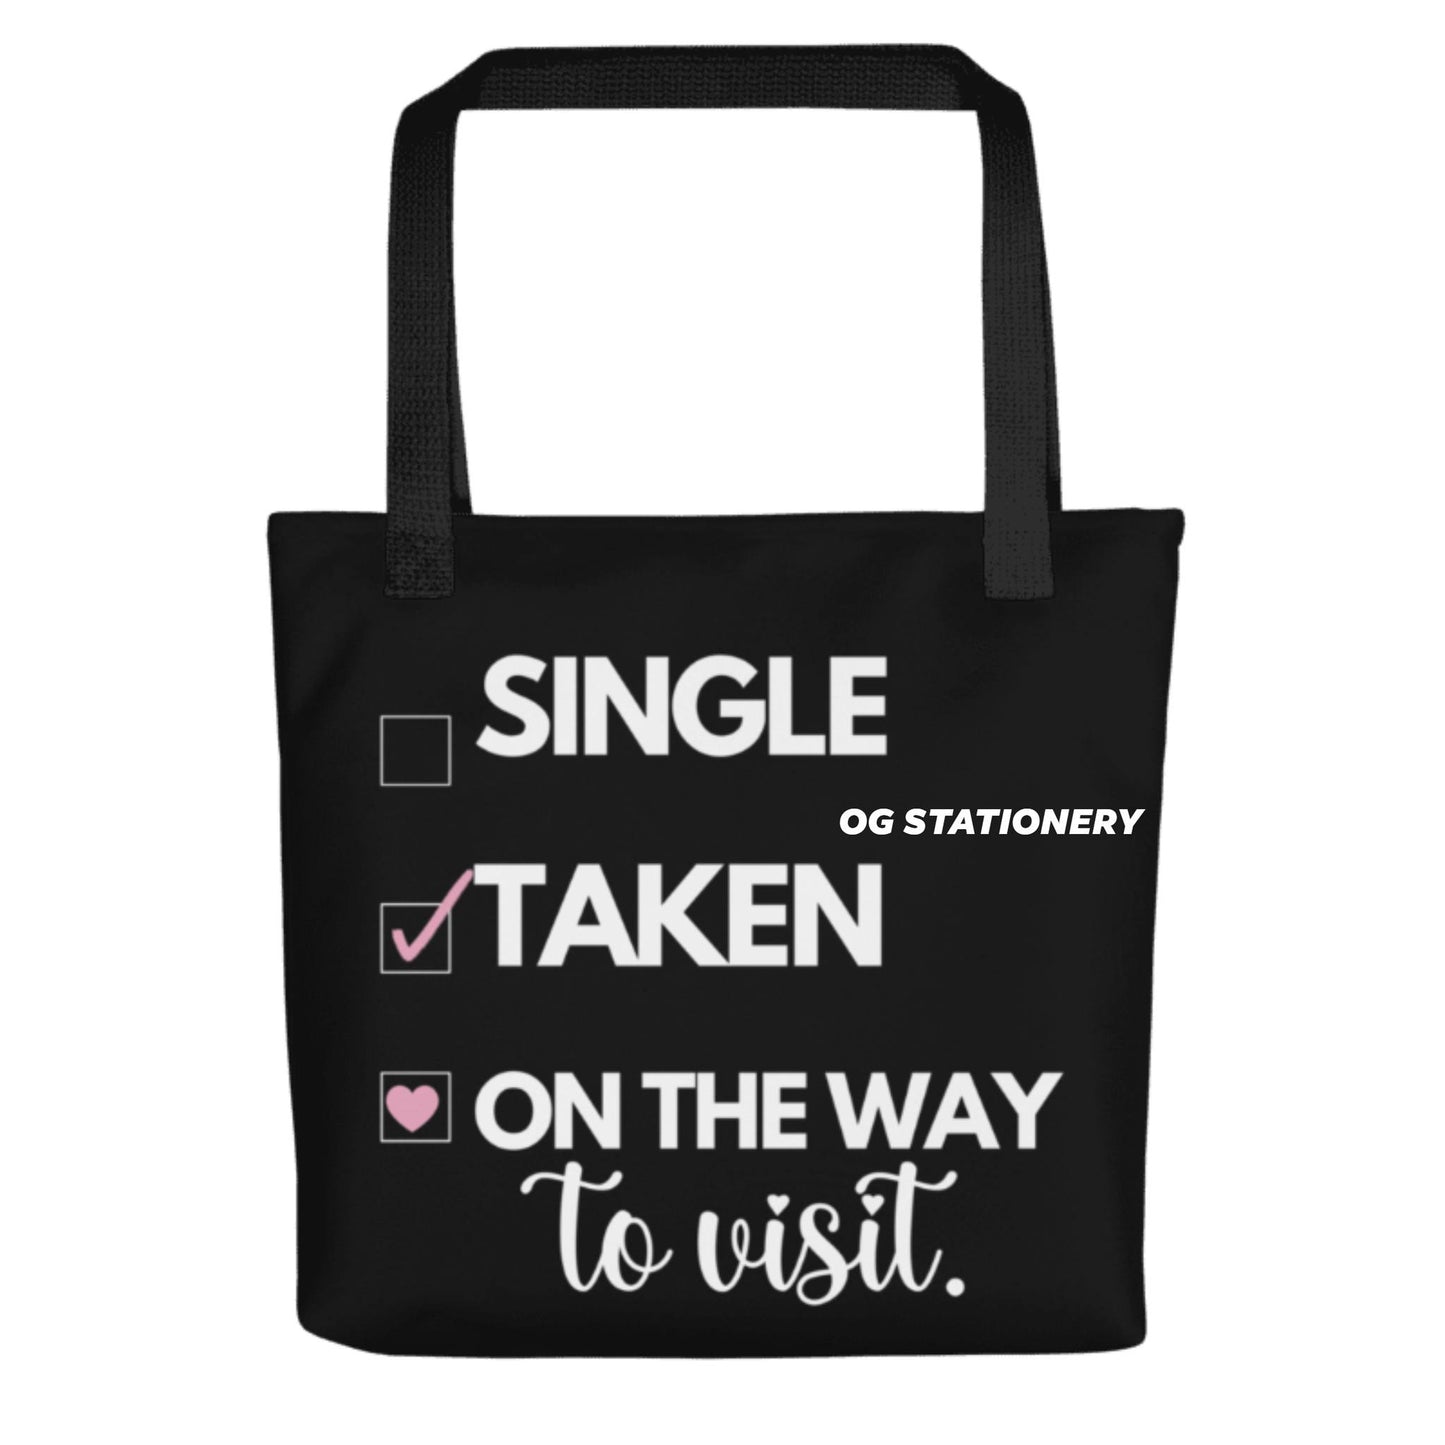 On The Way To Visit, Tote Bag